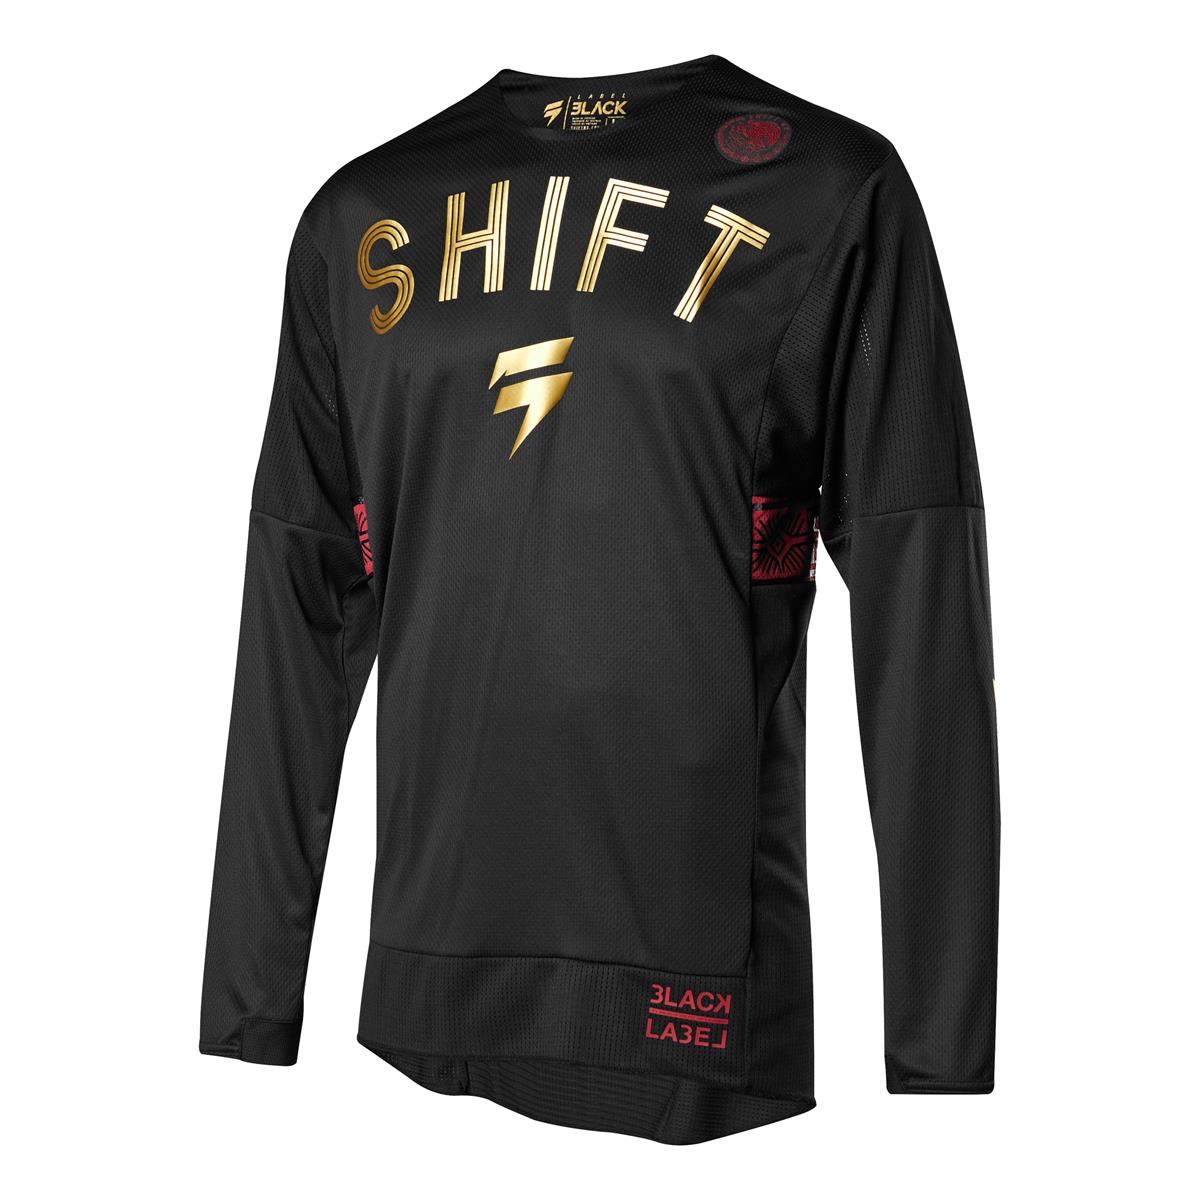 Shift Jersey 3lack Label Black/Red - Special Edition Muerte